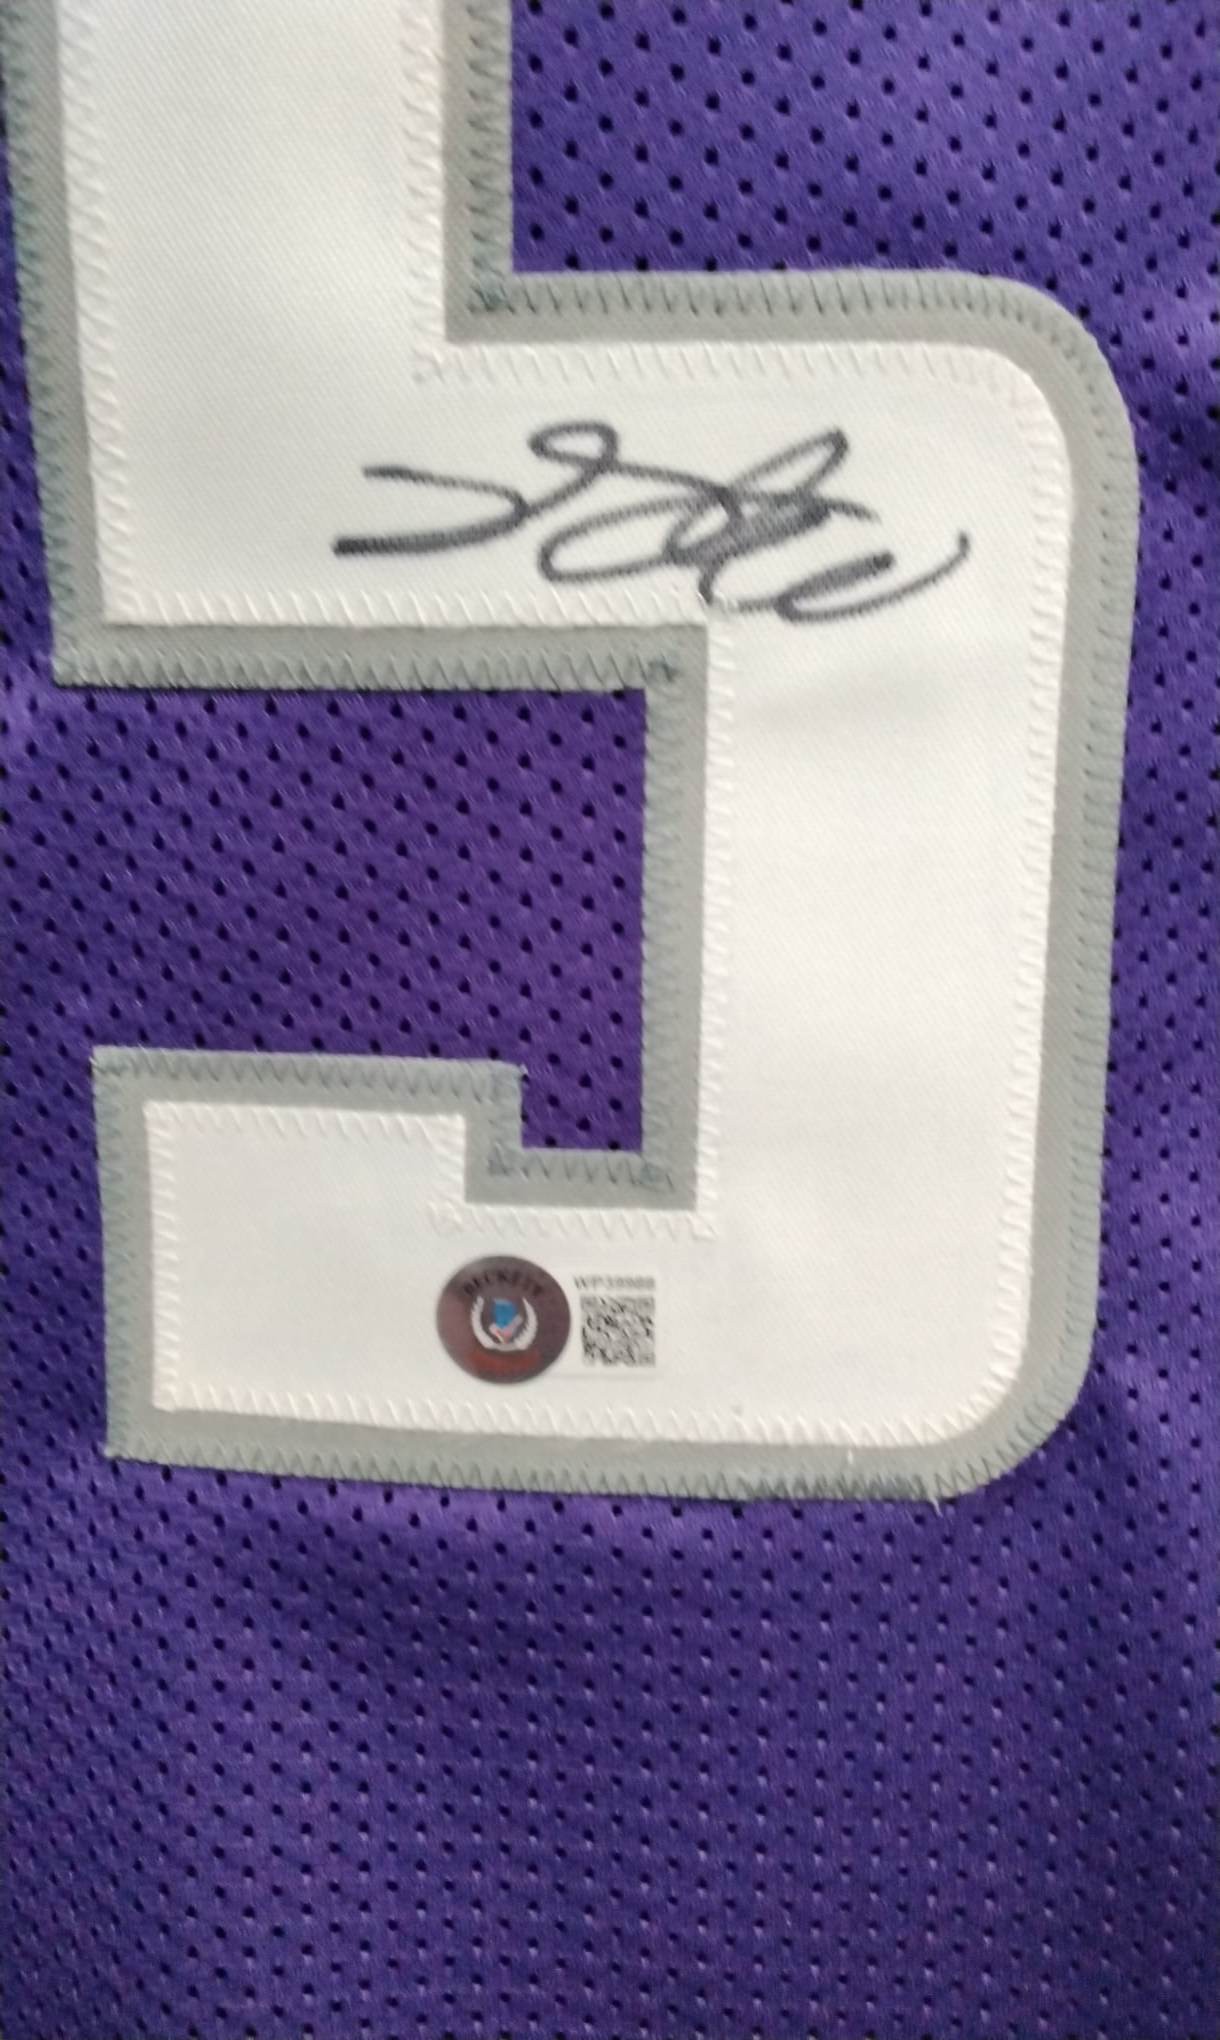 Anyone interested in buying this jersey signed by fox? : r/kings